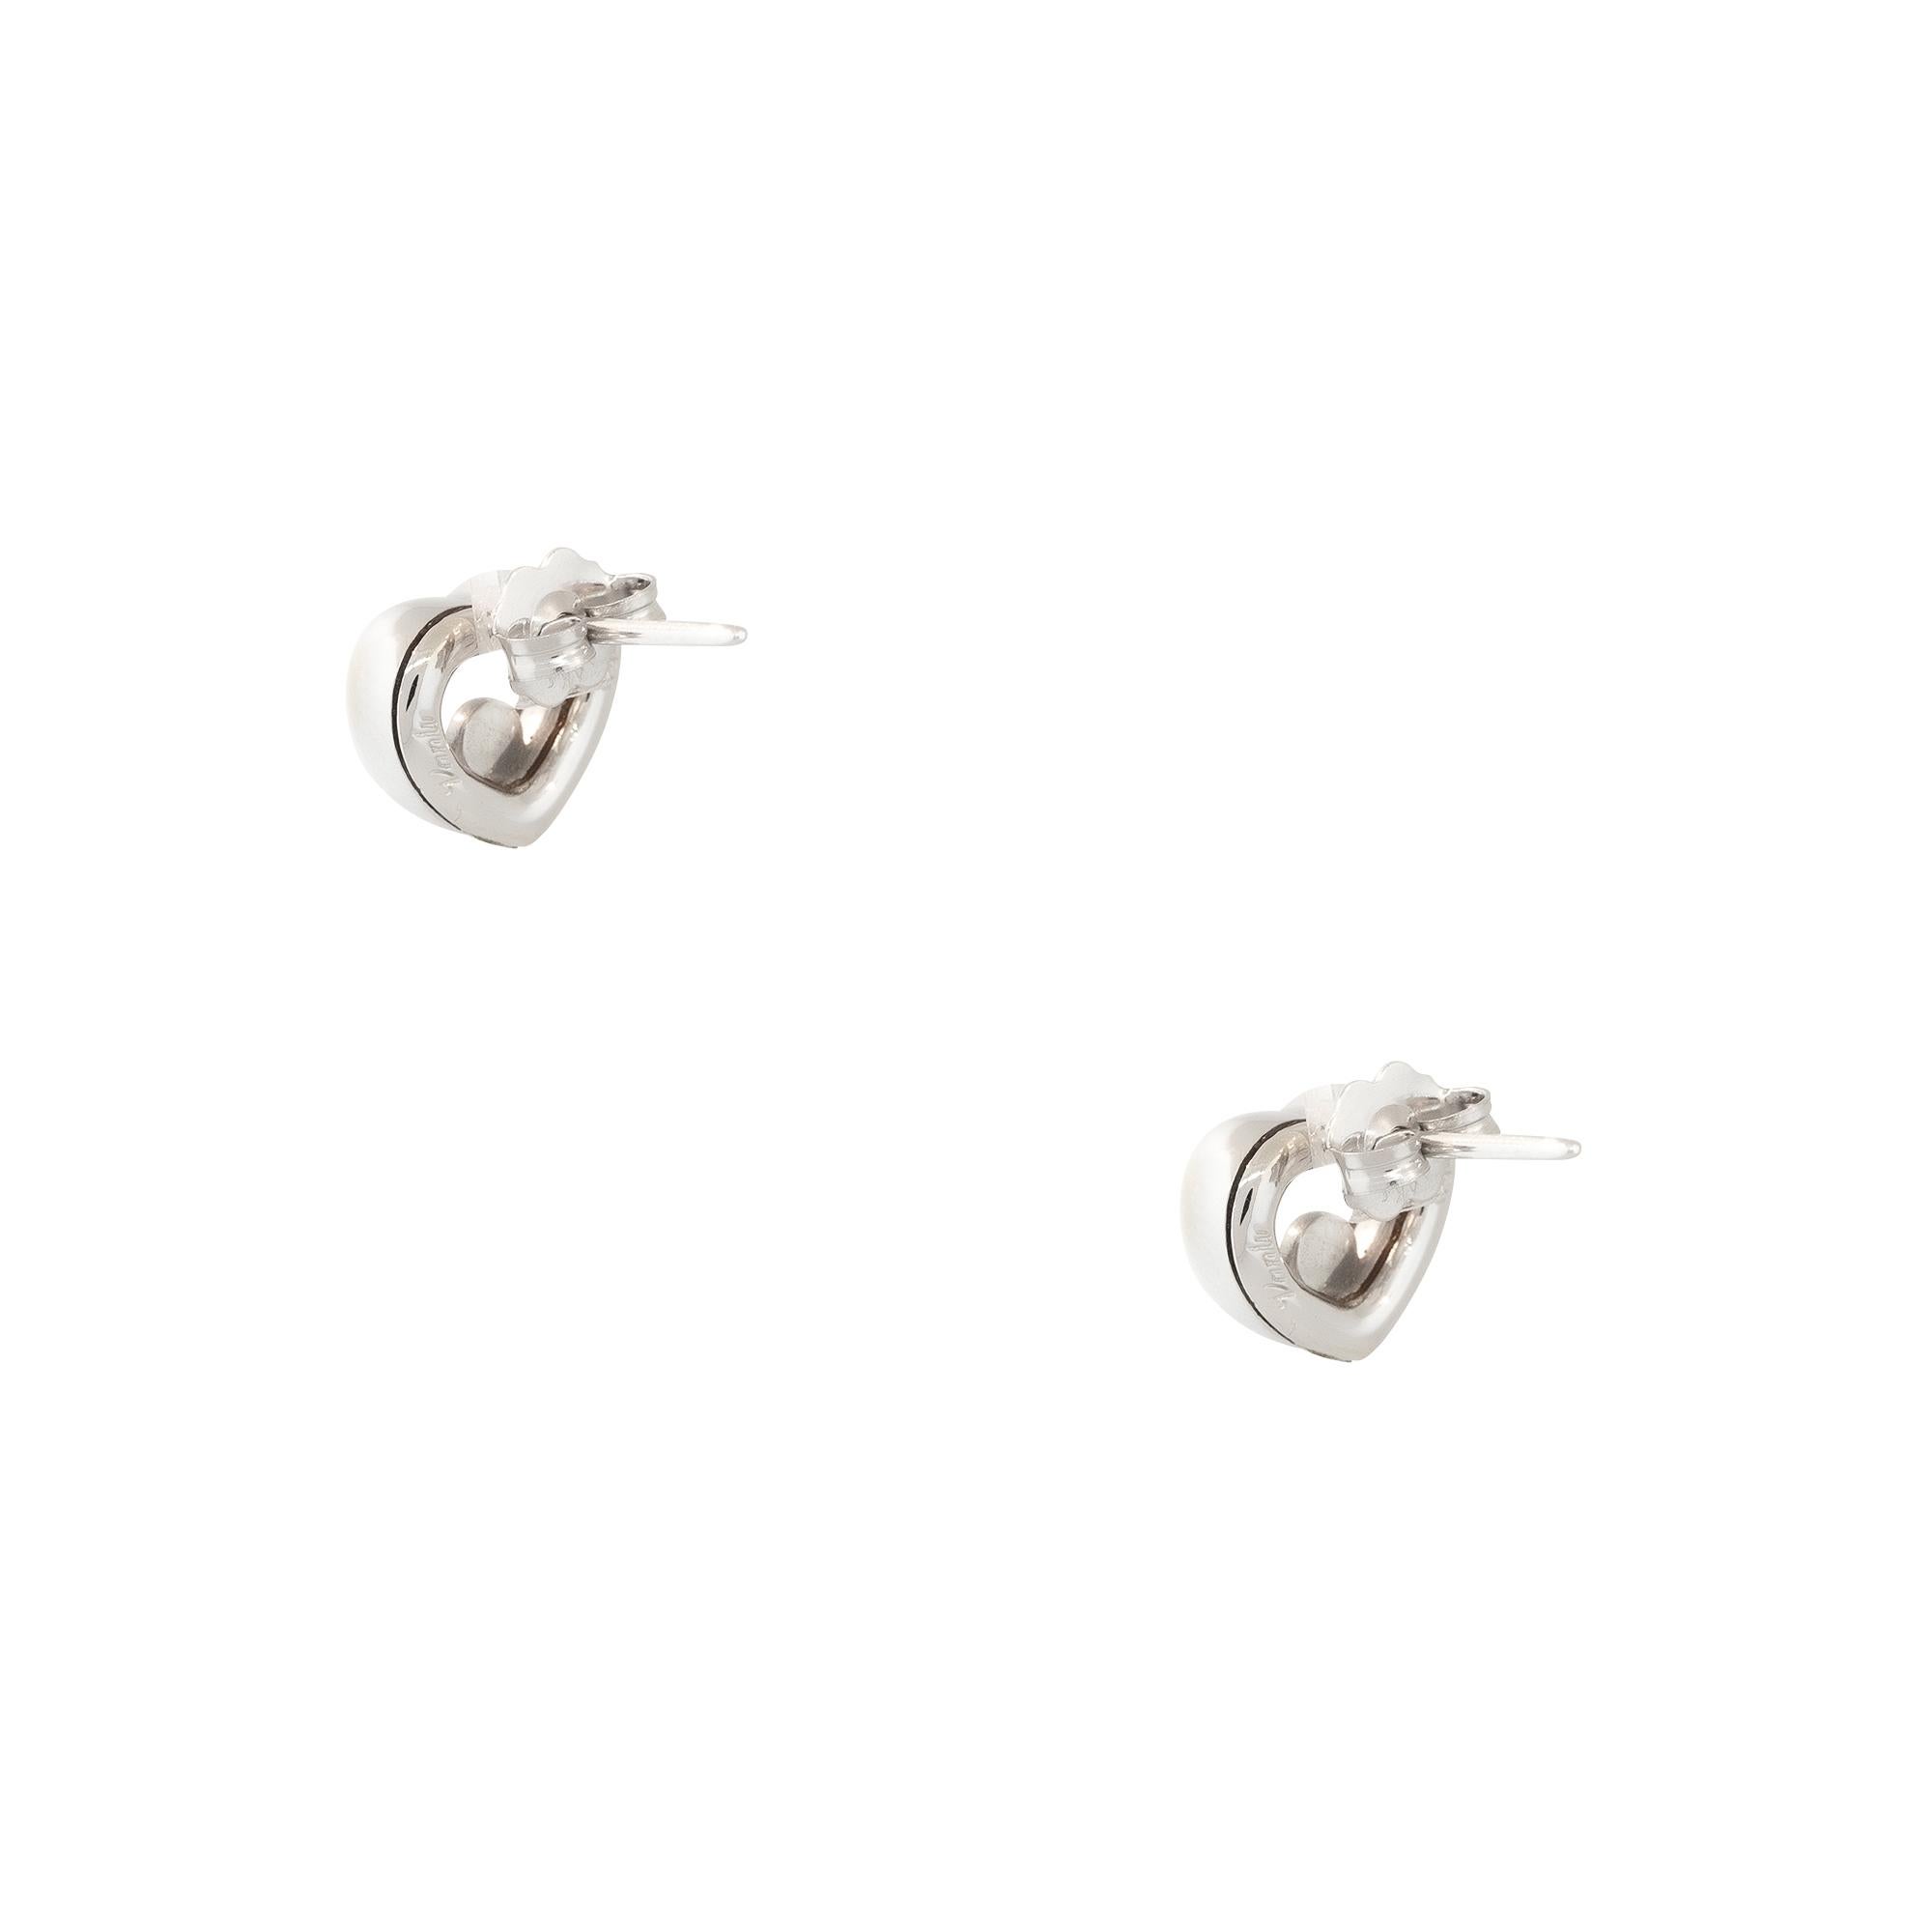 18k White Gold 0.05ctw Floating Diamond Heart Shaped Earrings

Material: 18k White Gold
Diamond Details: Approximately 0.05ctw of Round Cut Diamonds
Total Weight: 5.44g (3.5dwt) 
Earring Backs: Friction Backs
Additional Details: This item comes with